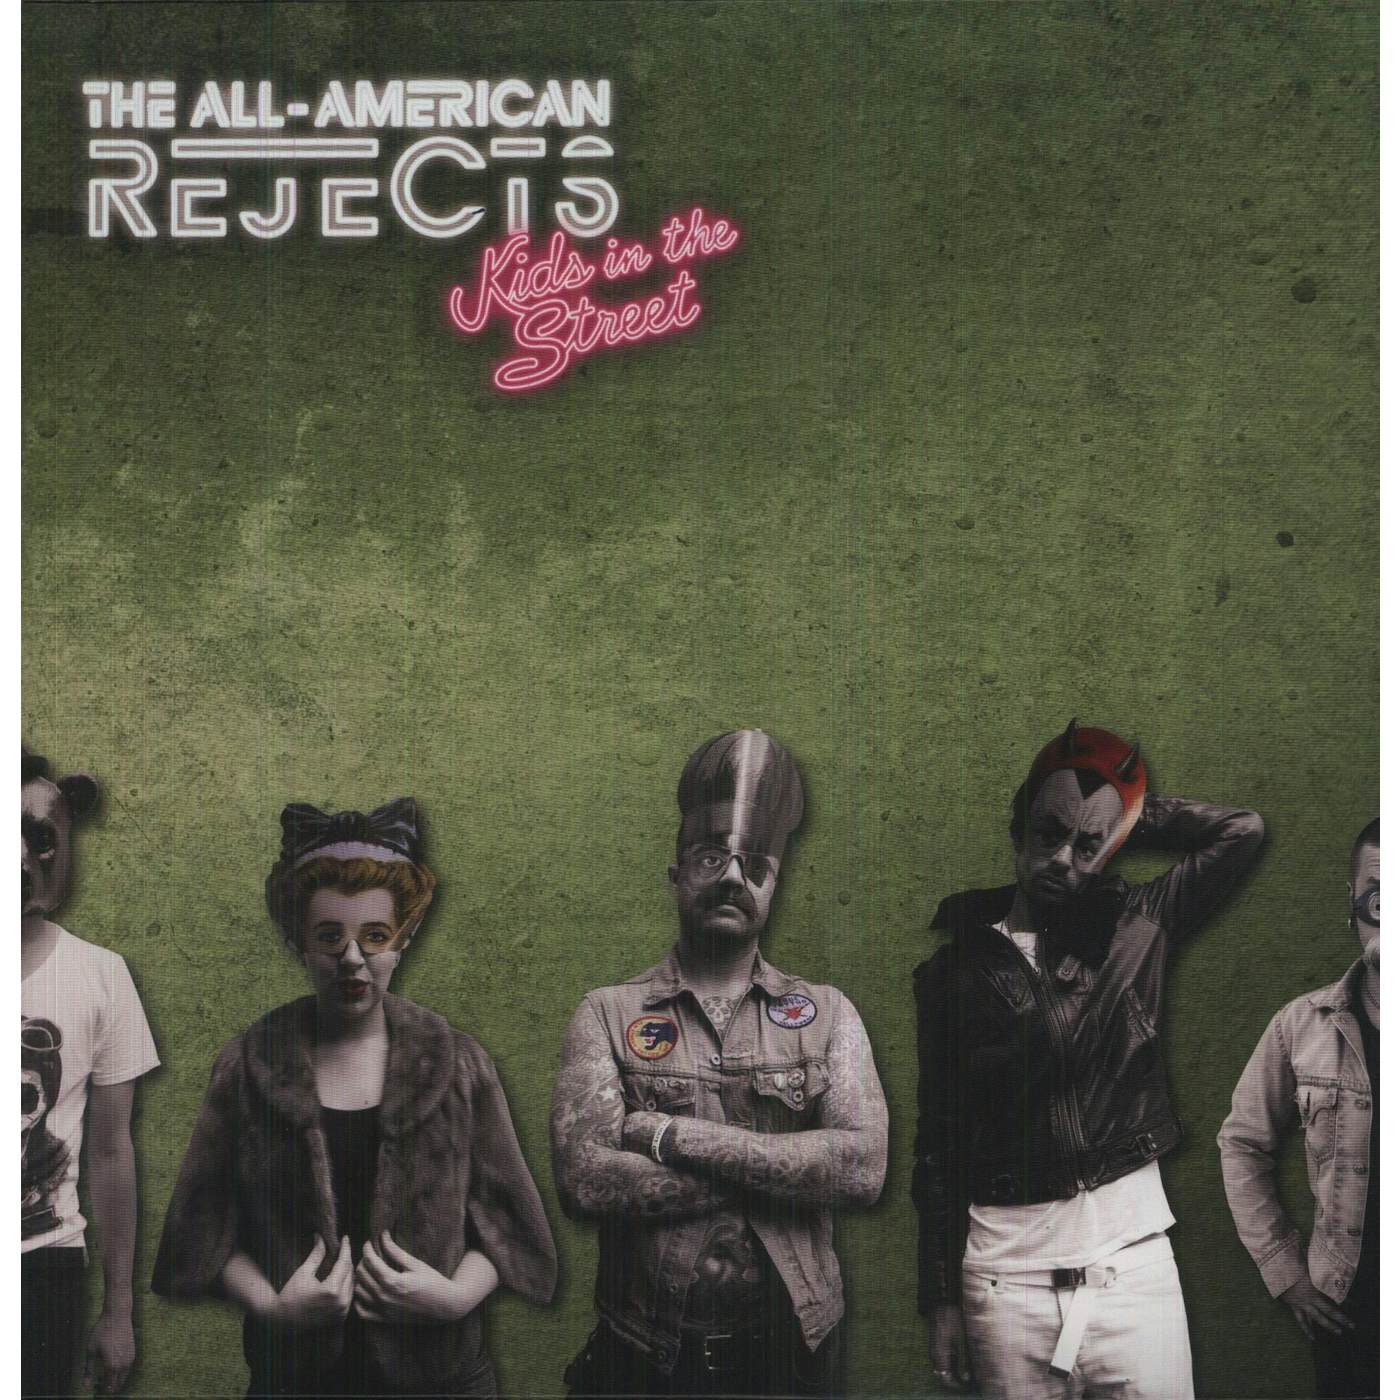 The All-American Rejects KIDS IN THE STREET Vinyl Record - Green Vinyl, Red Vinyl, Clear Vinyl